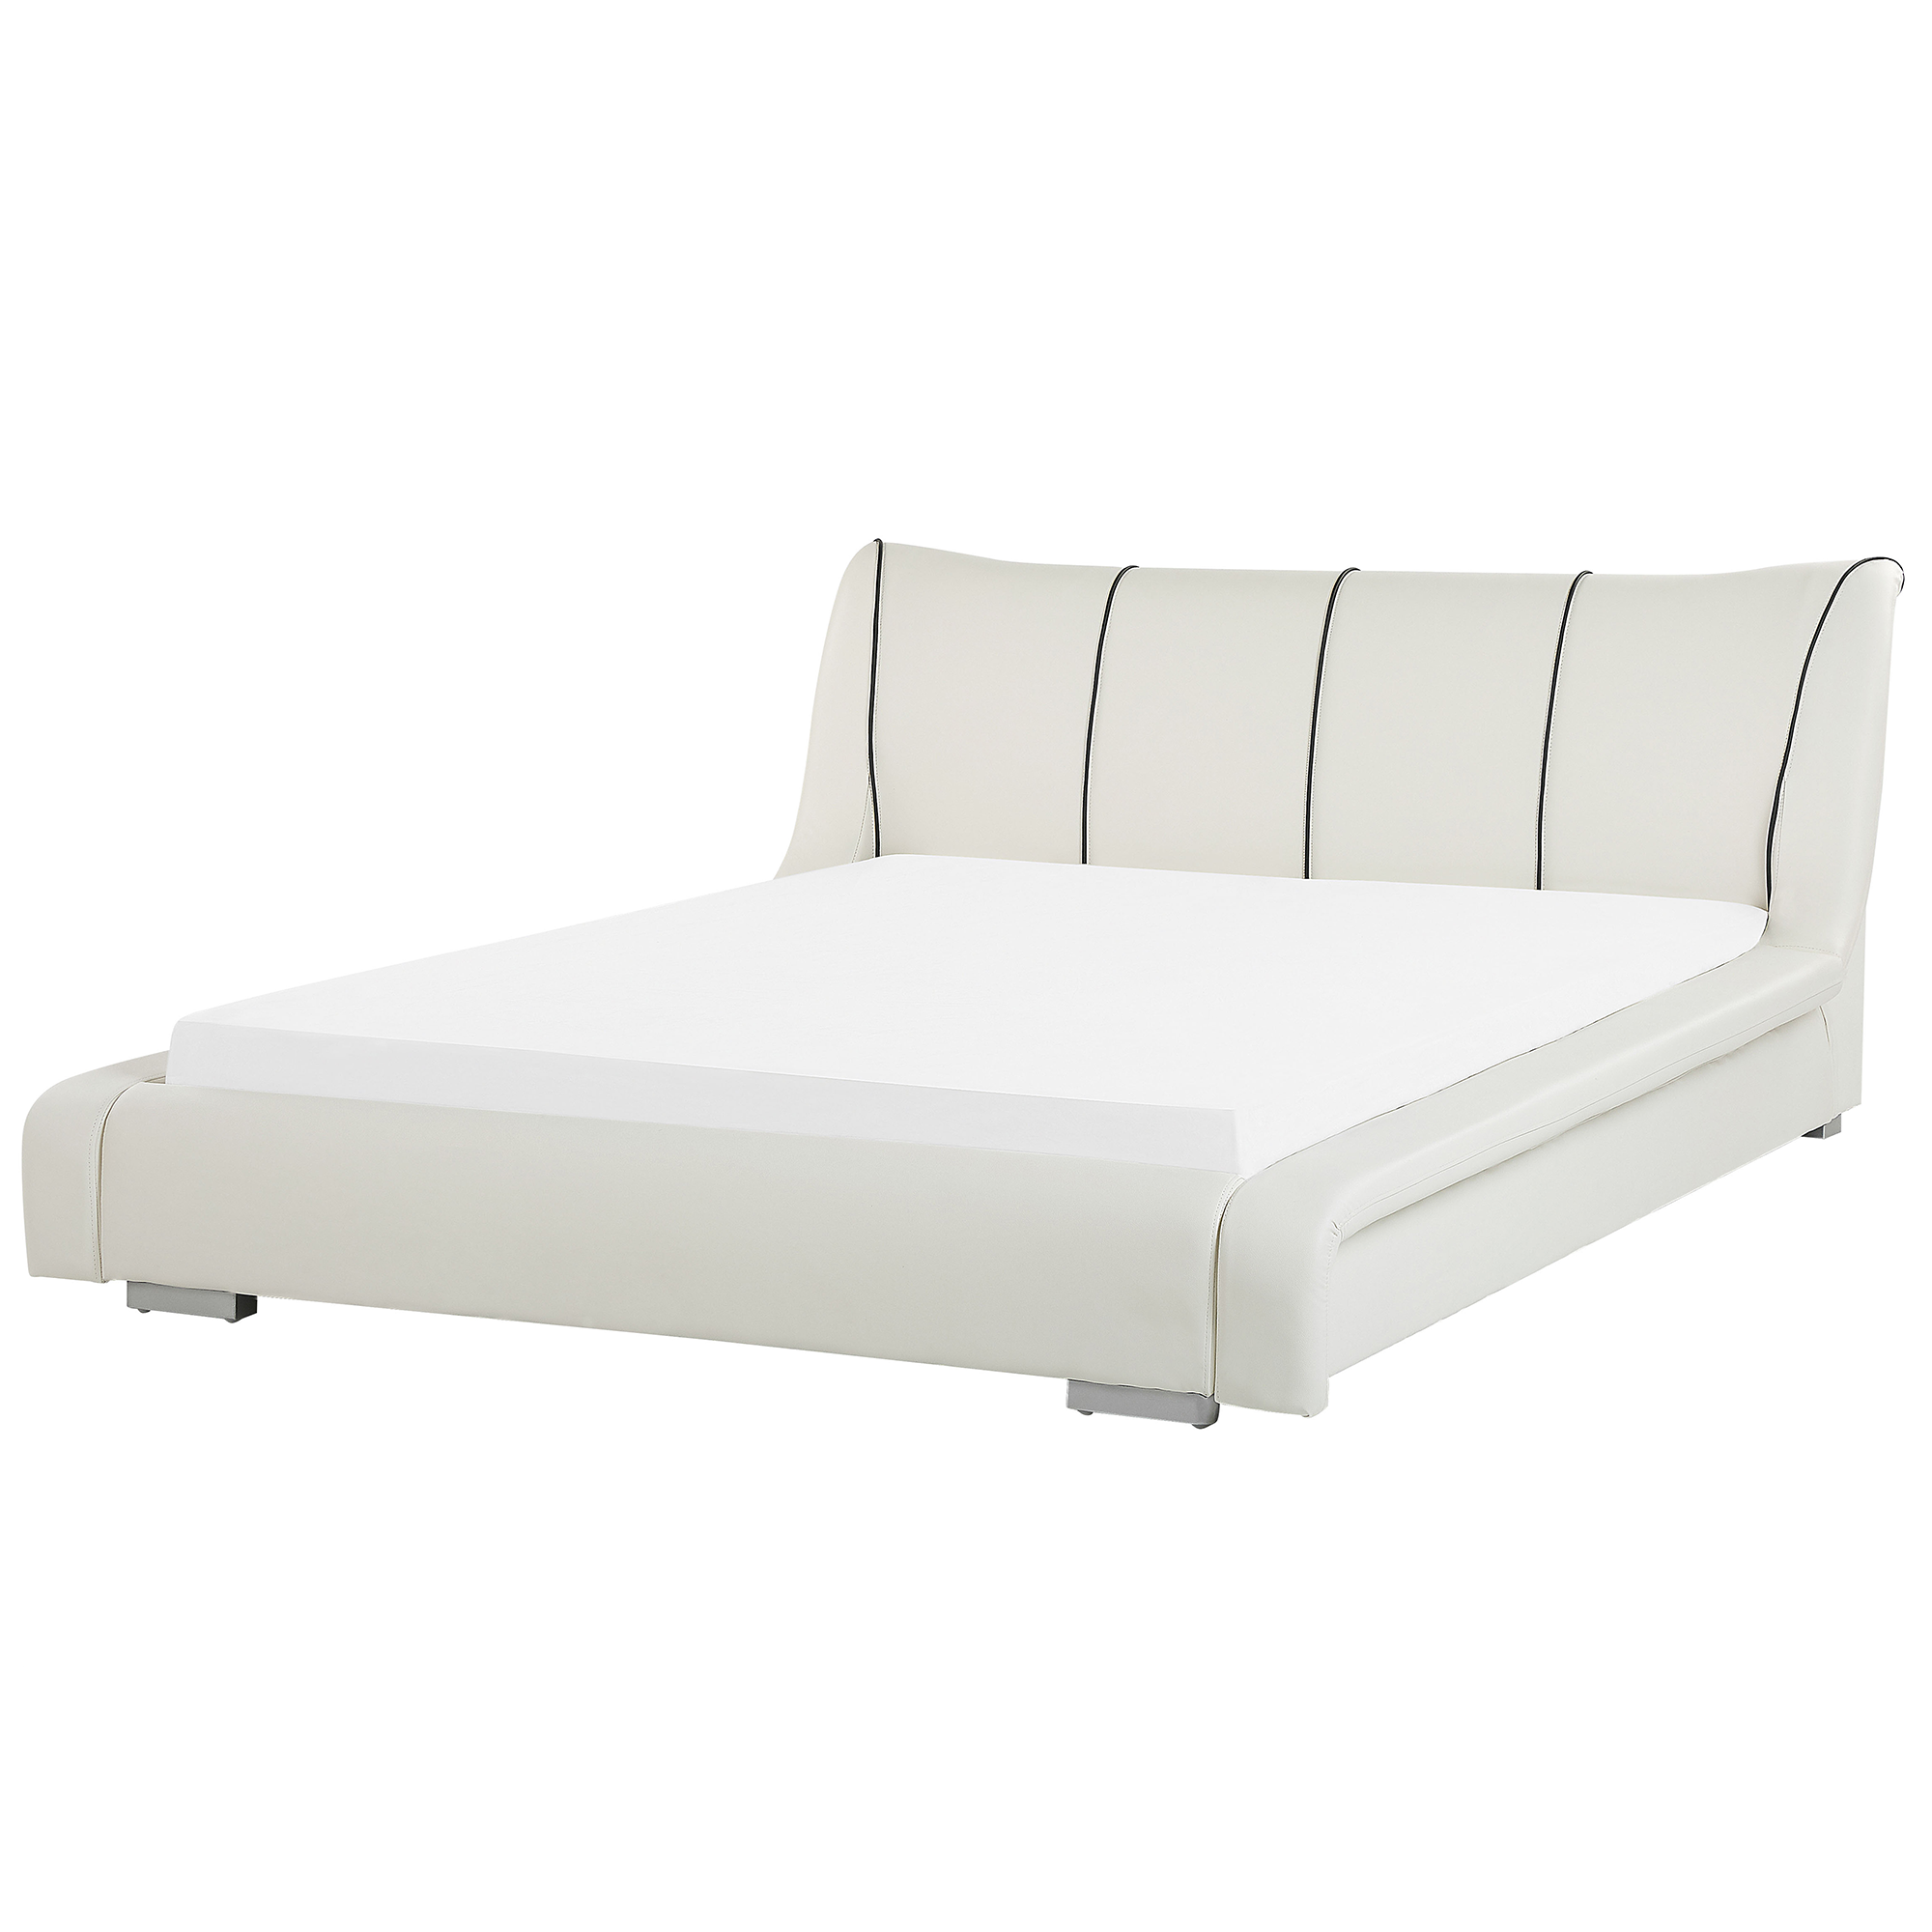 Beliani Waterbed White Leather EU Super King Size 6ft Accessories Wave Reduction Large Headboard Modern